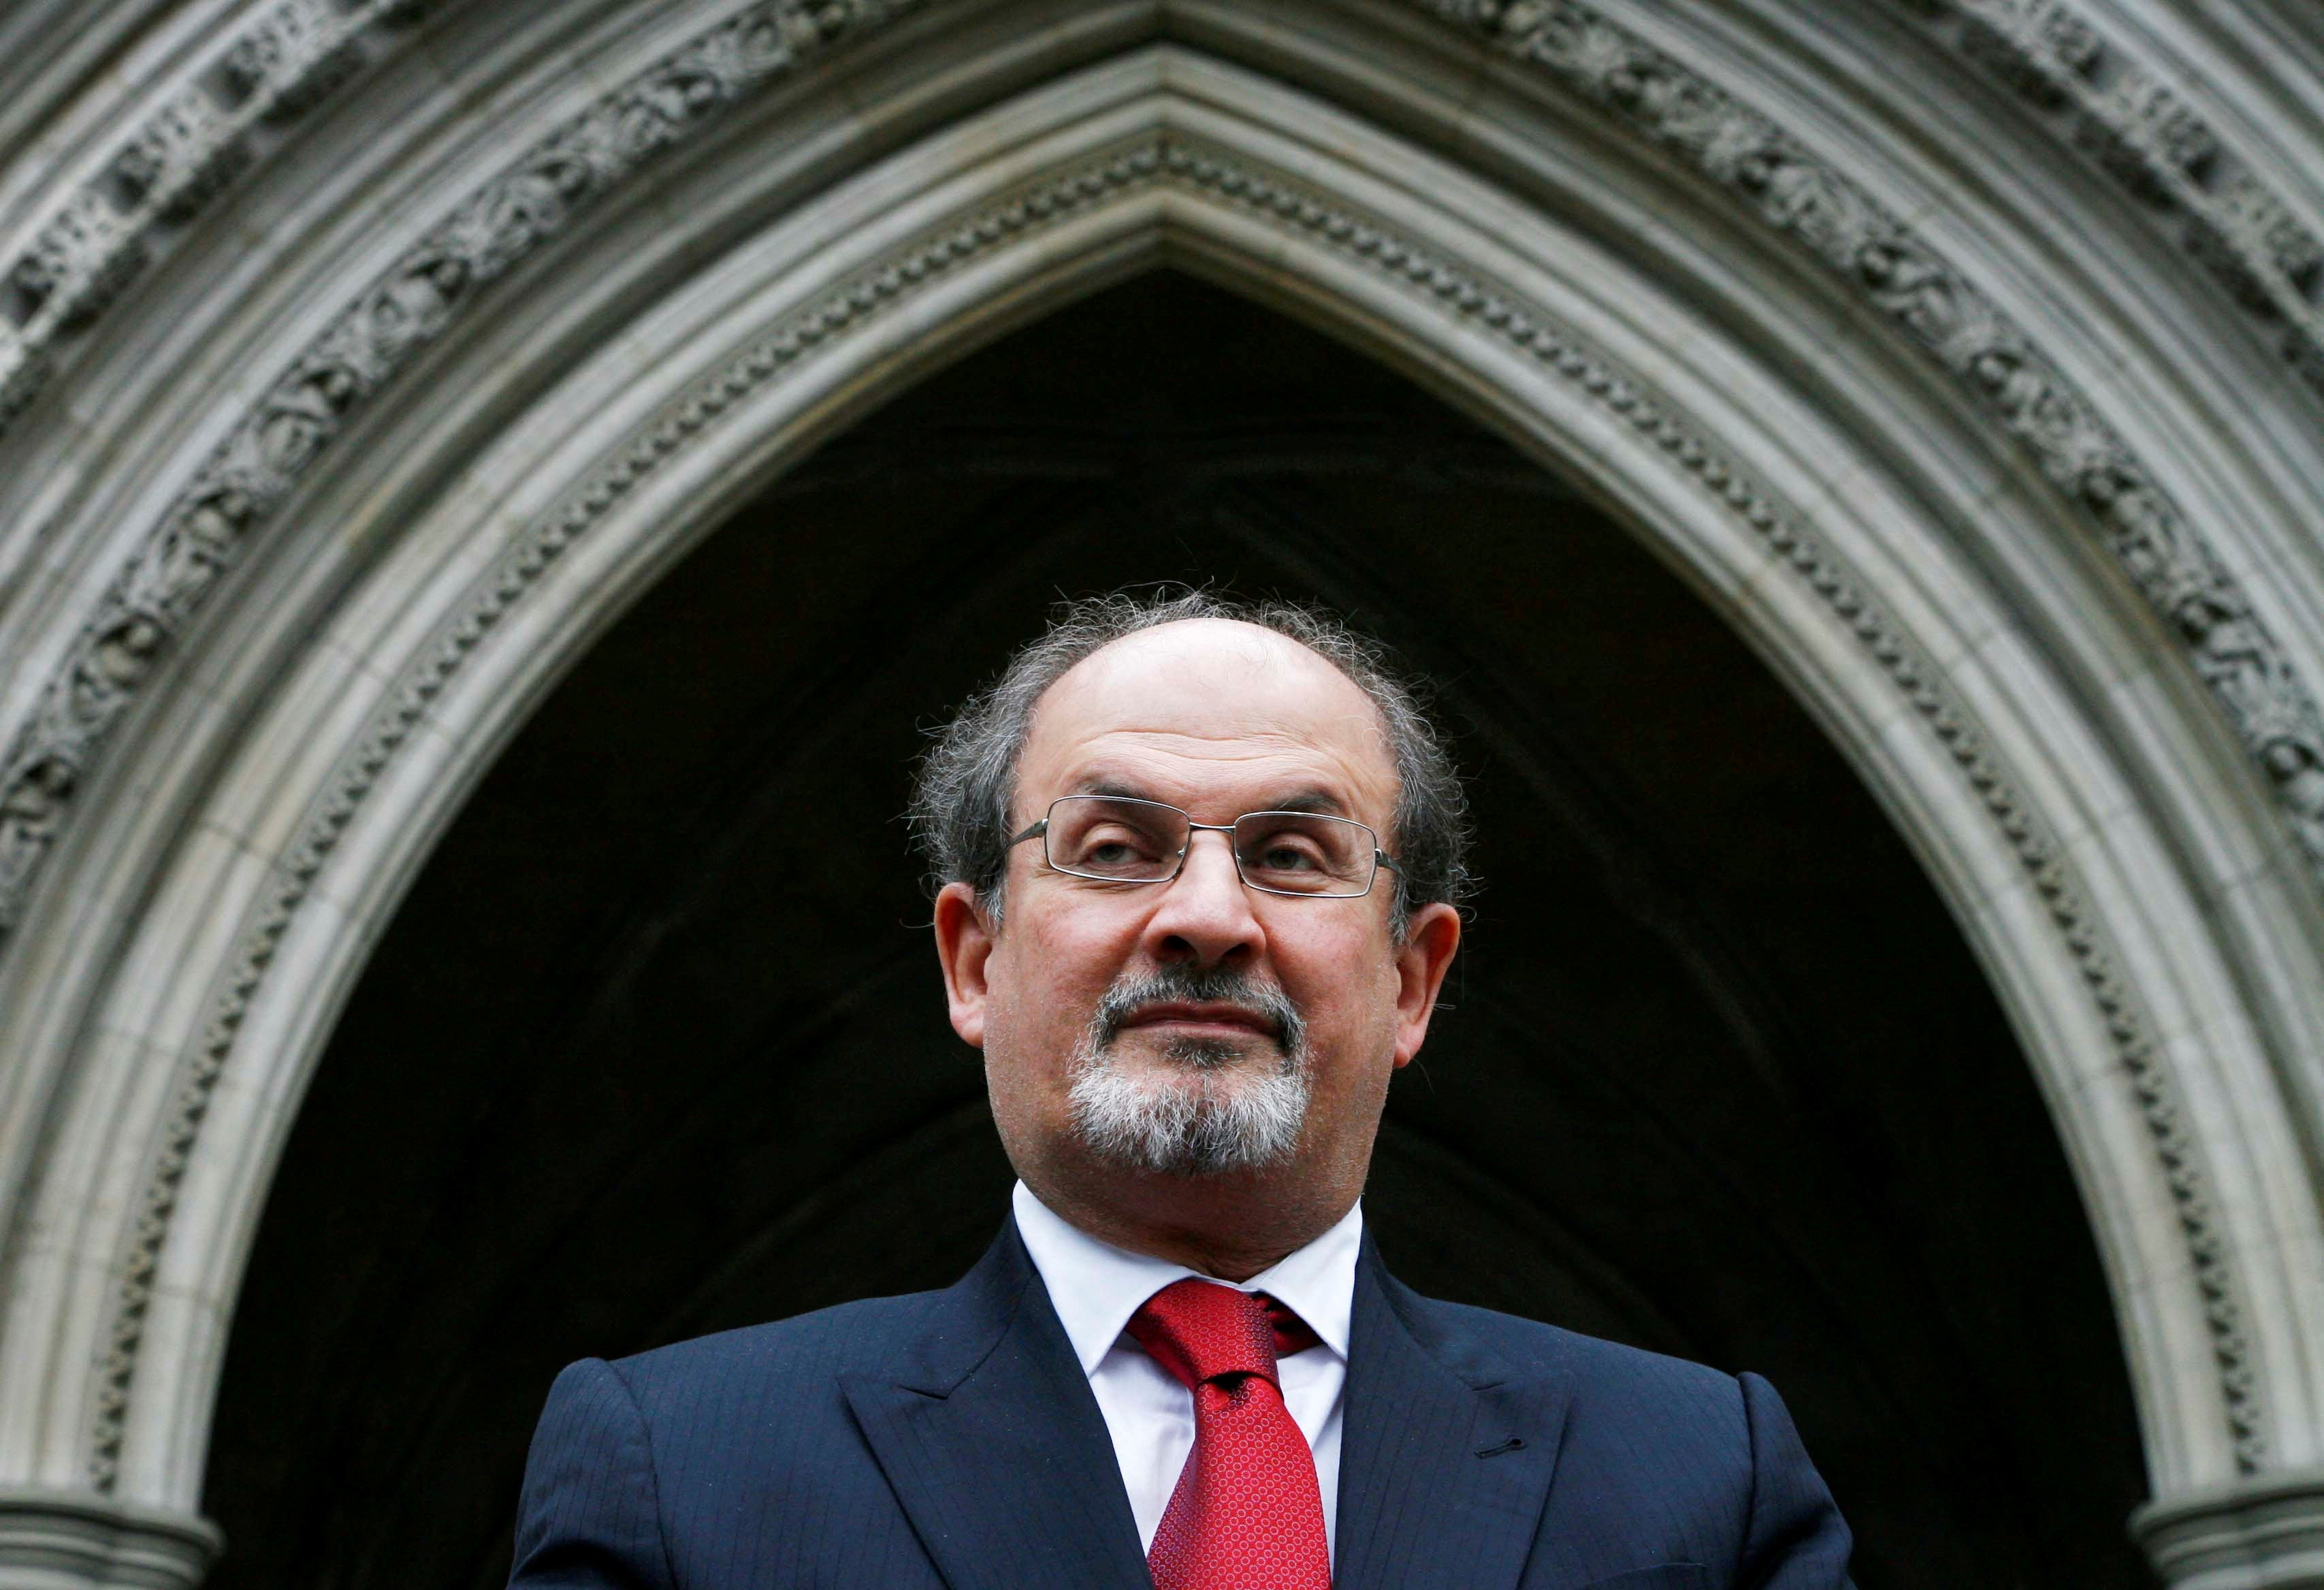 Author Salman Rushdie arrives at the High Court in London